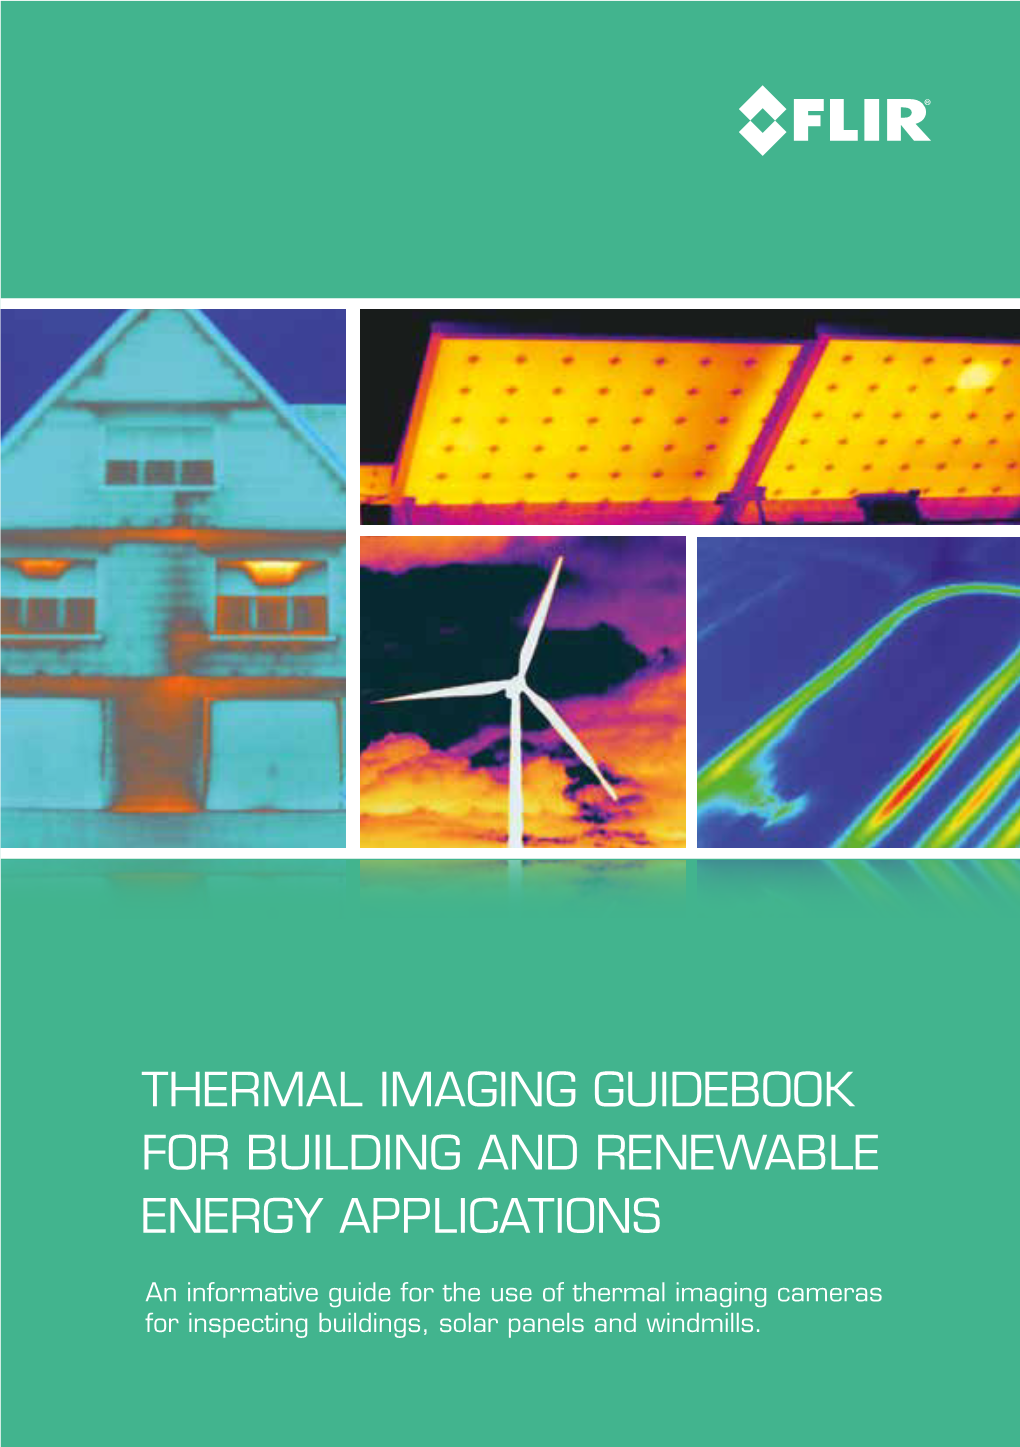 THERMAL IMAGING GUIDEBOOK for BUILDING and Renewable Energy APPLICATIONS